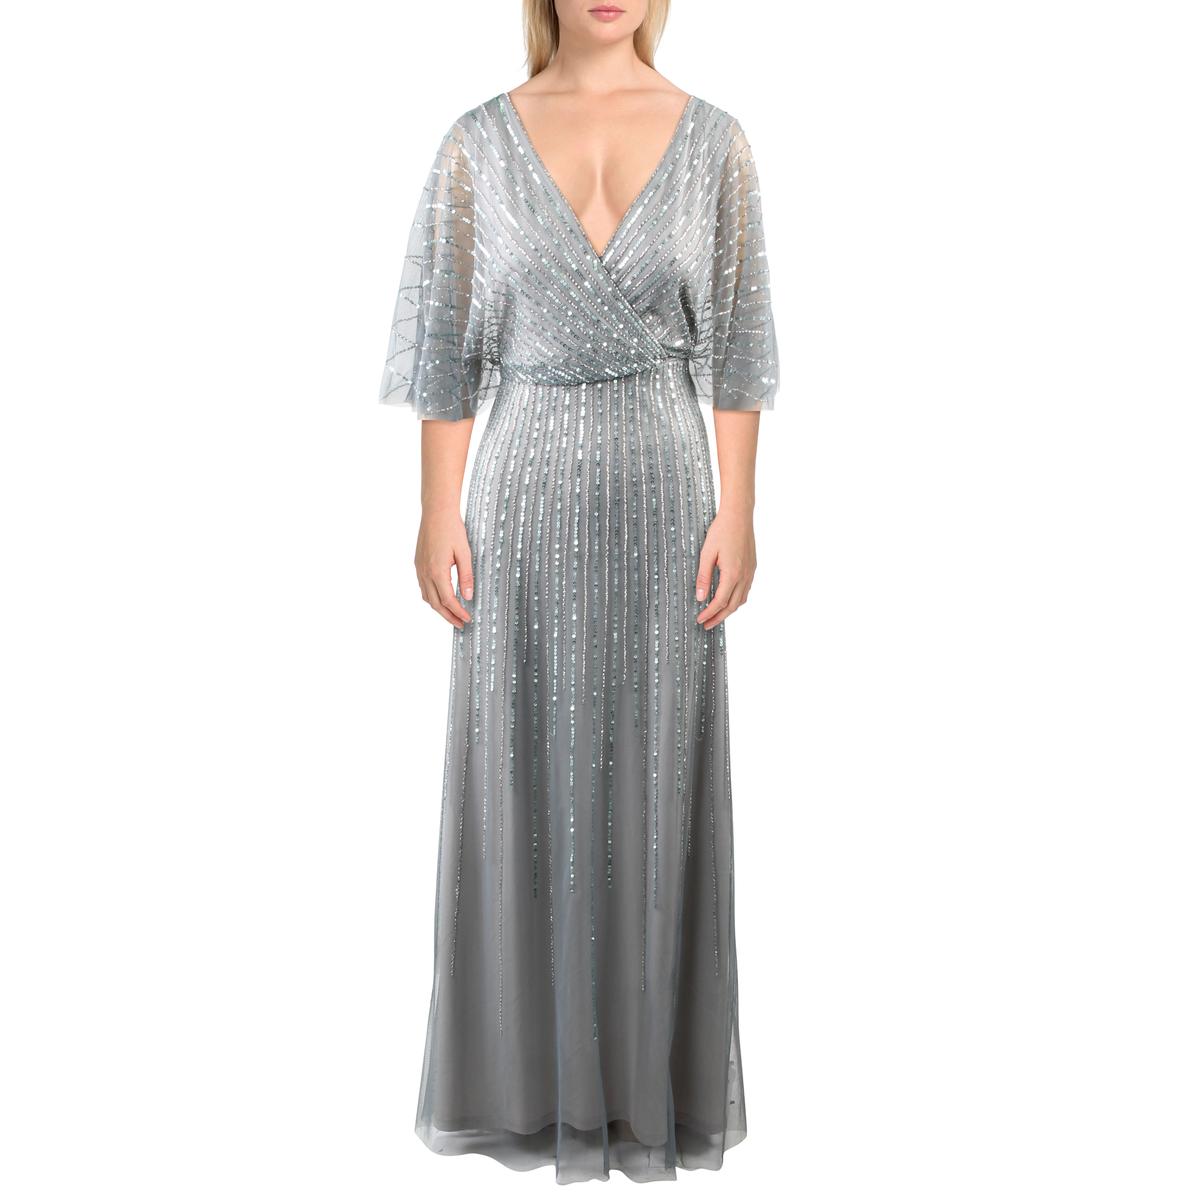 Adrianna Papell Womens Gray Embellished Blouson Evening Dress Gown 6 ...